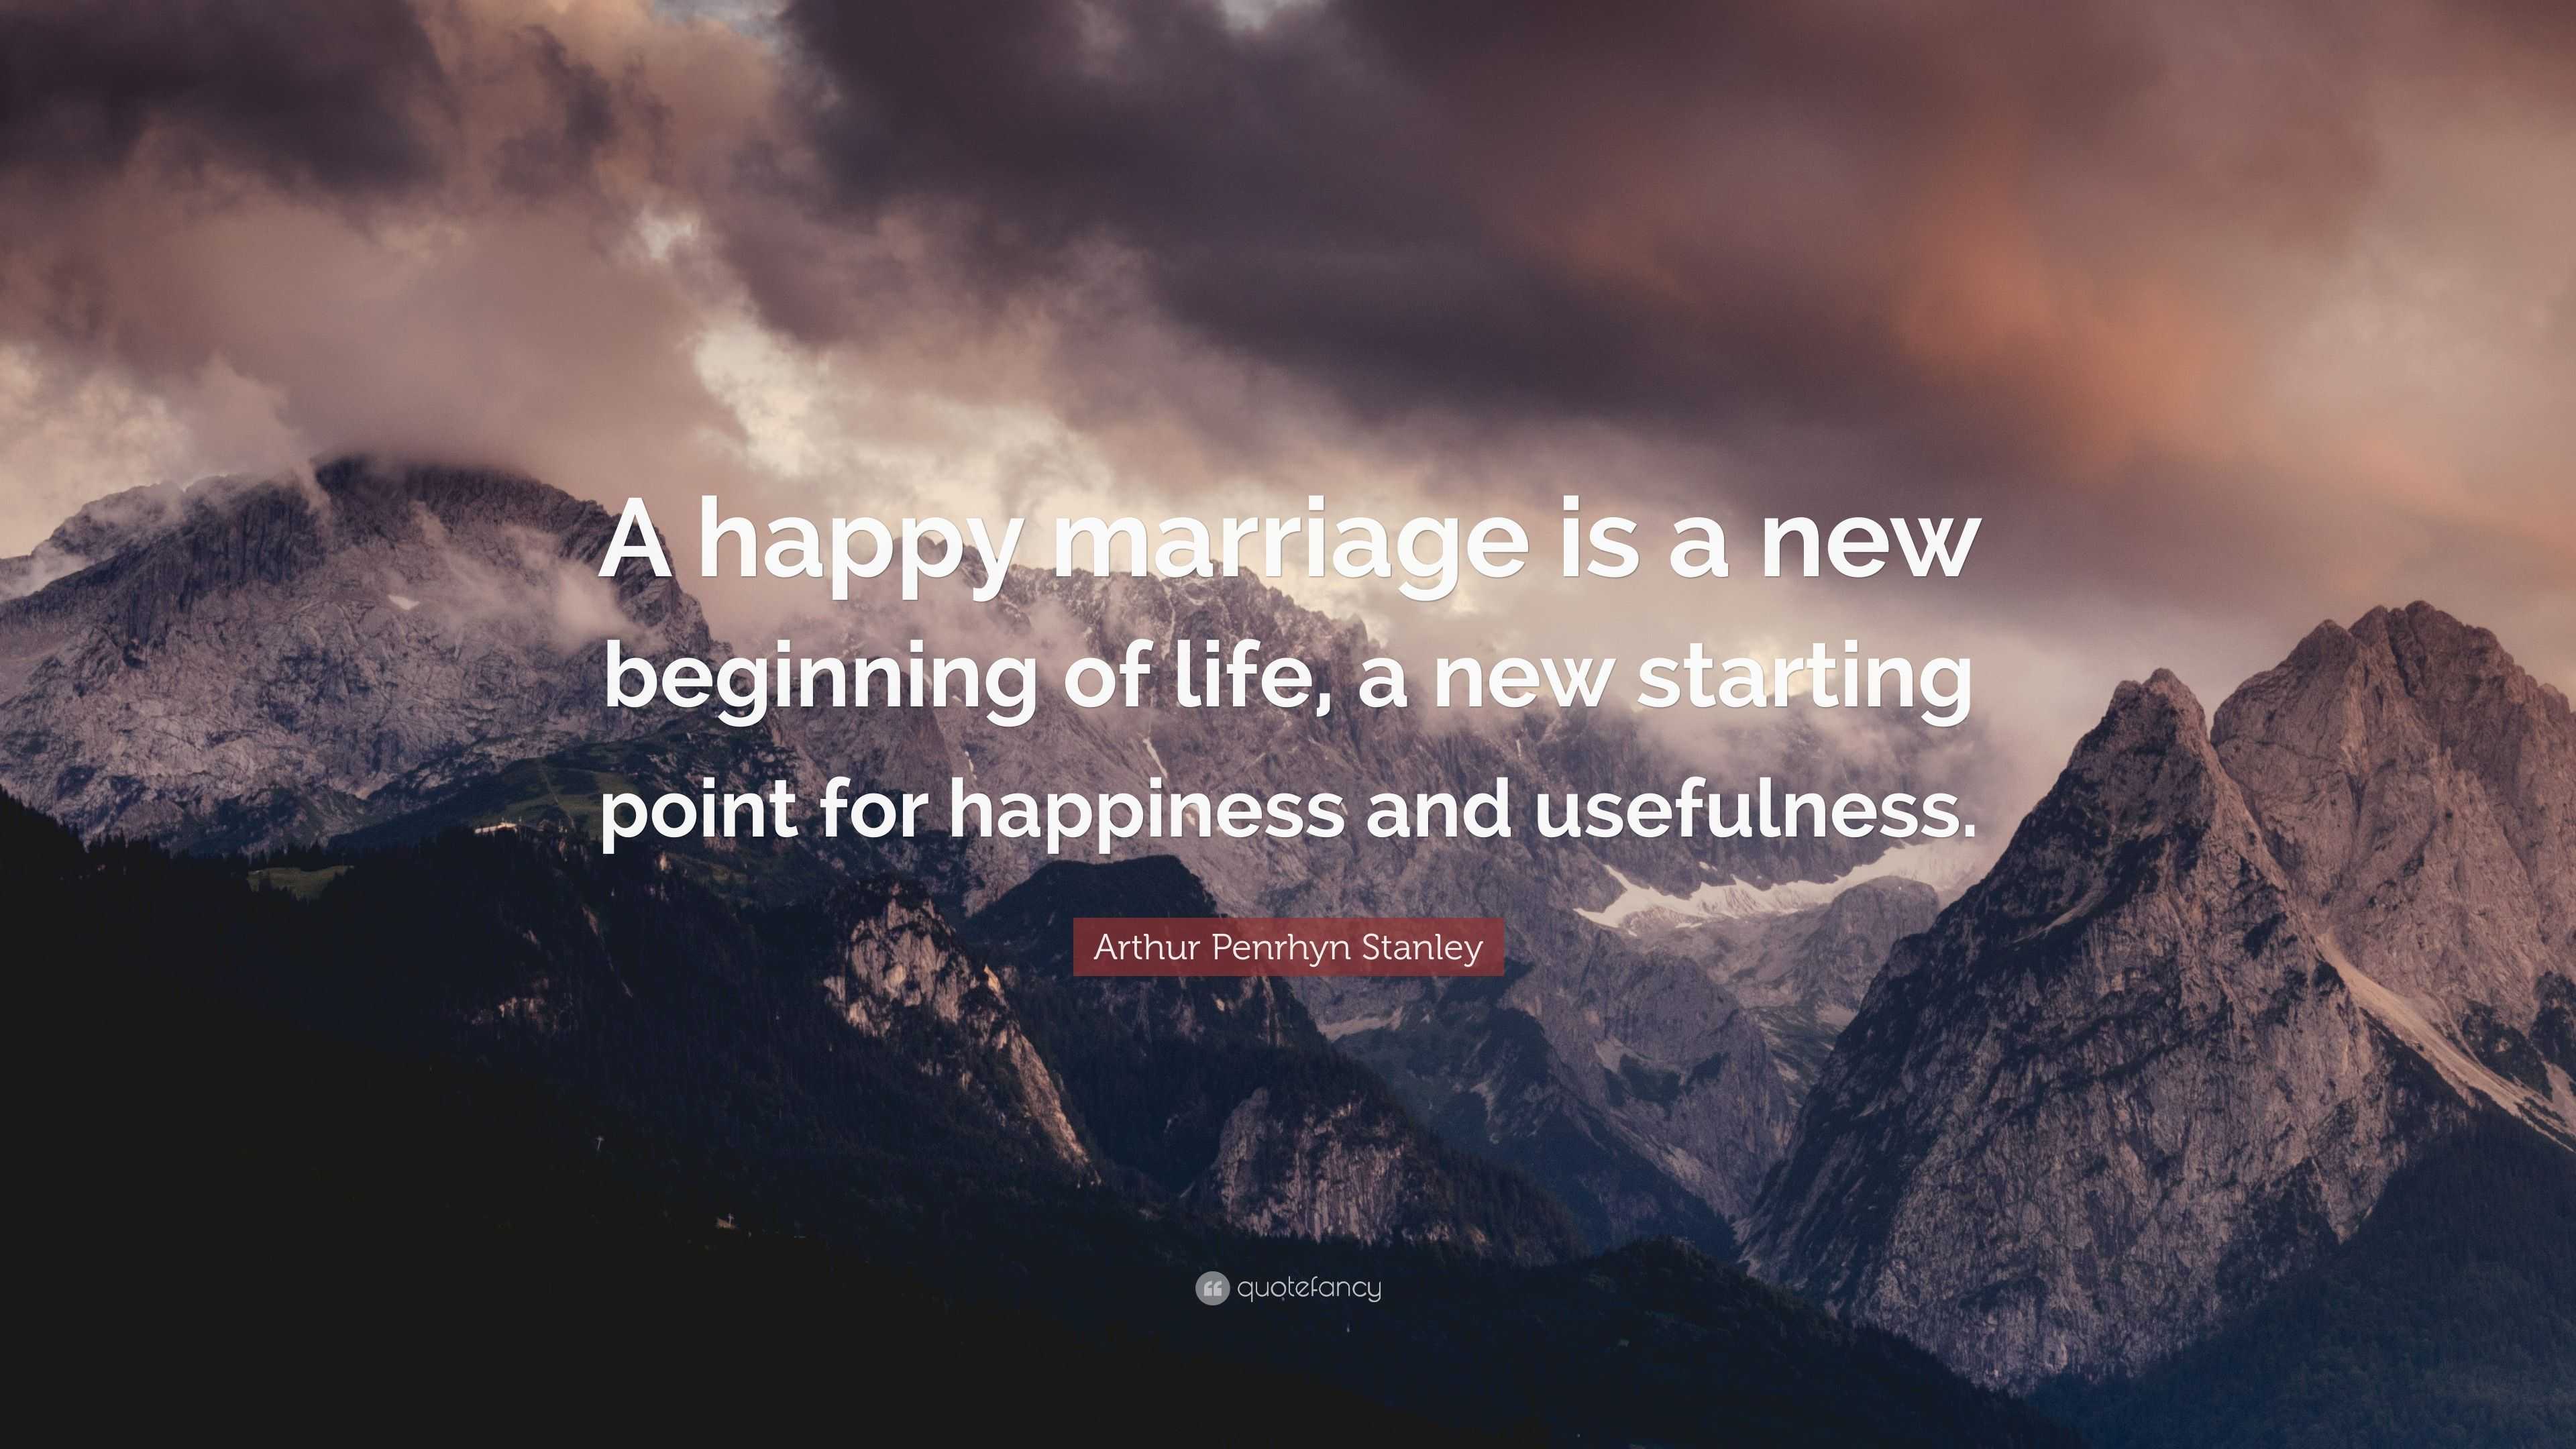 quotes about new beginnings in life arthur penrhyn stanley quote u201ca happy marriage is a new beginning